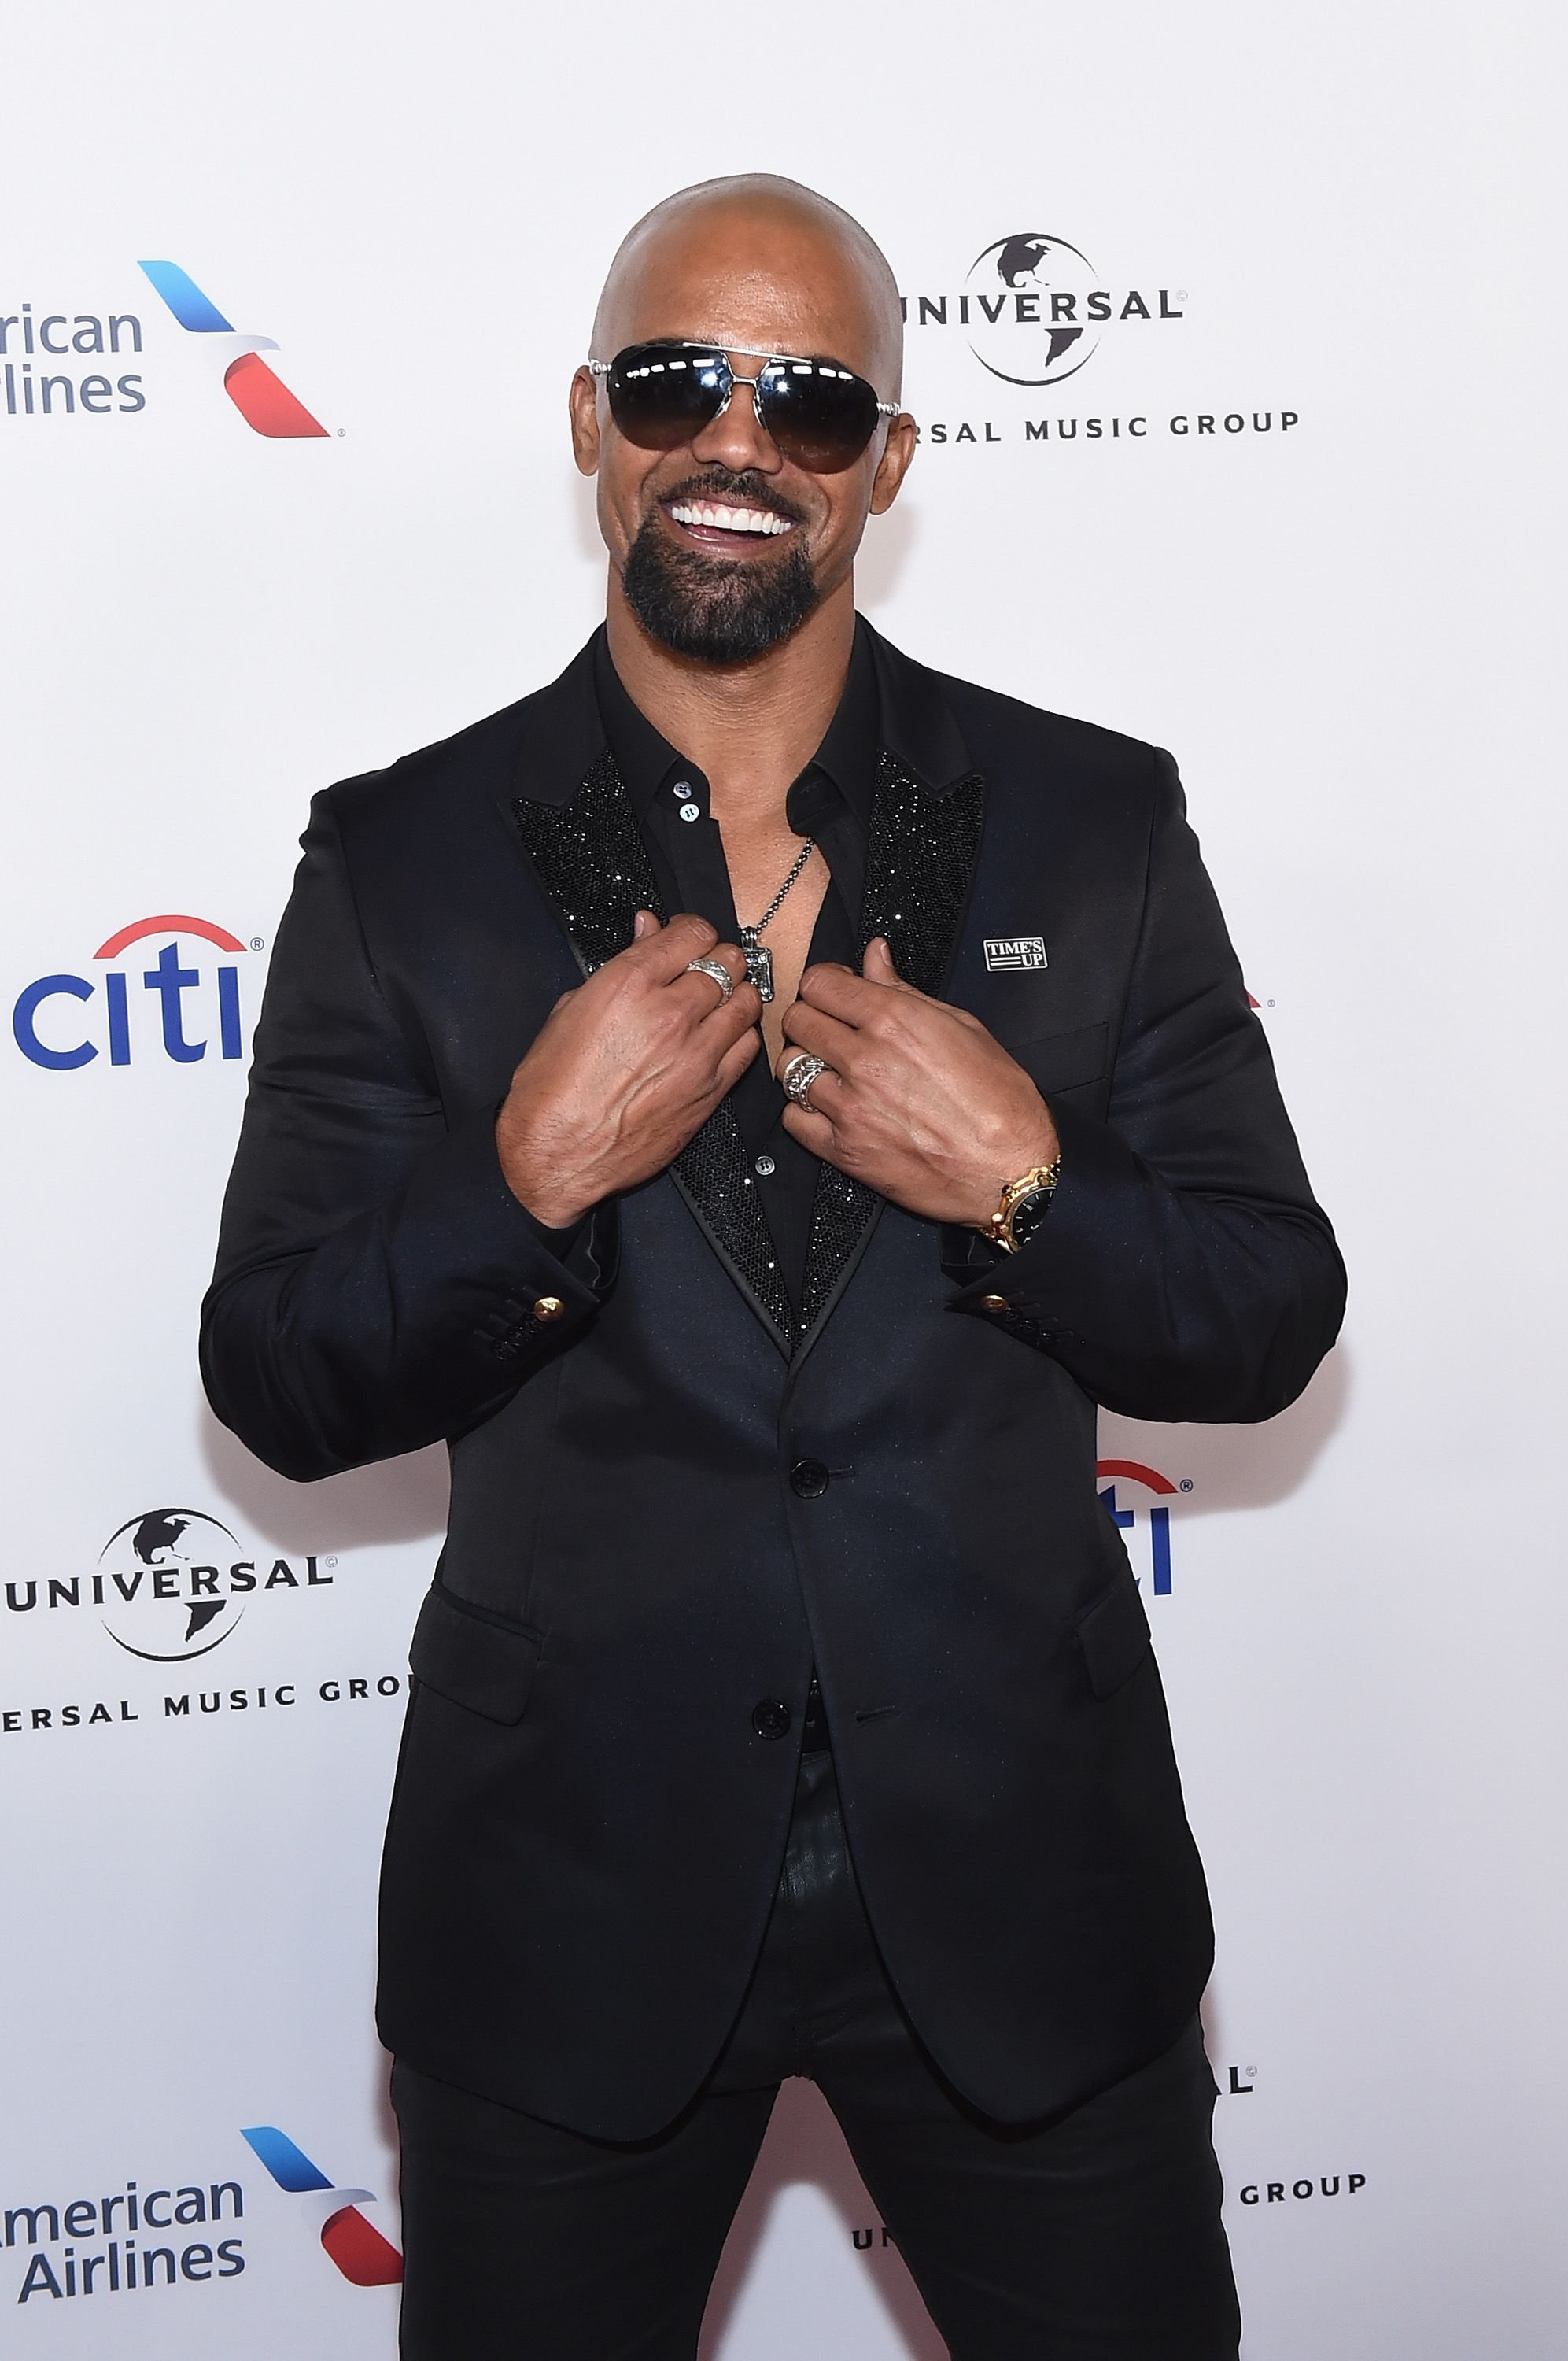 Shemar Moore at the Universal Music Group's After Party in New York City on January 28, 2018. | Photo: Getty Images